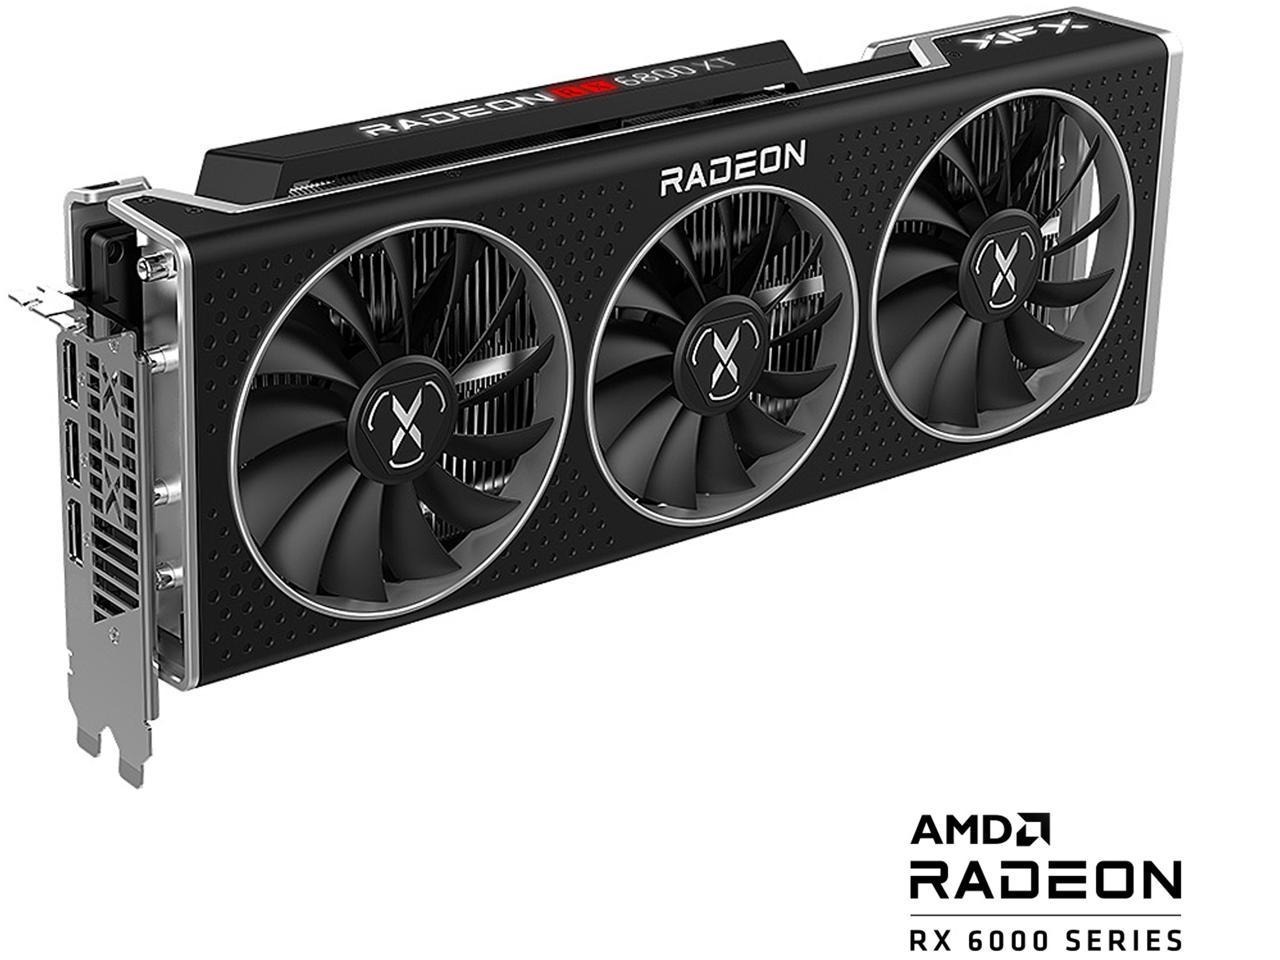 XFX SPEEDSTER MERC319 AMD Radeon RX 6800 XT CORE Gaming Graphics Card + Last Of Us Game (Online Game Code) $550 + Free Shipping